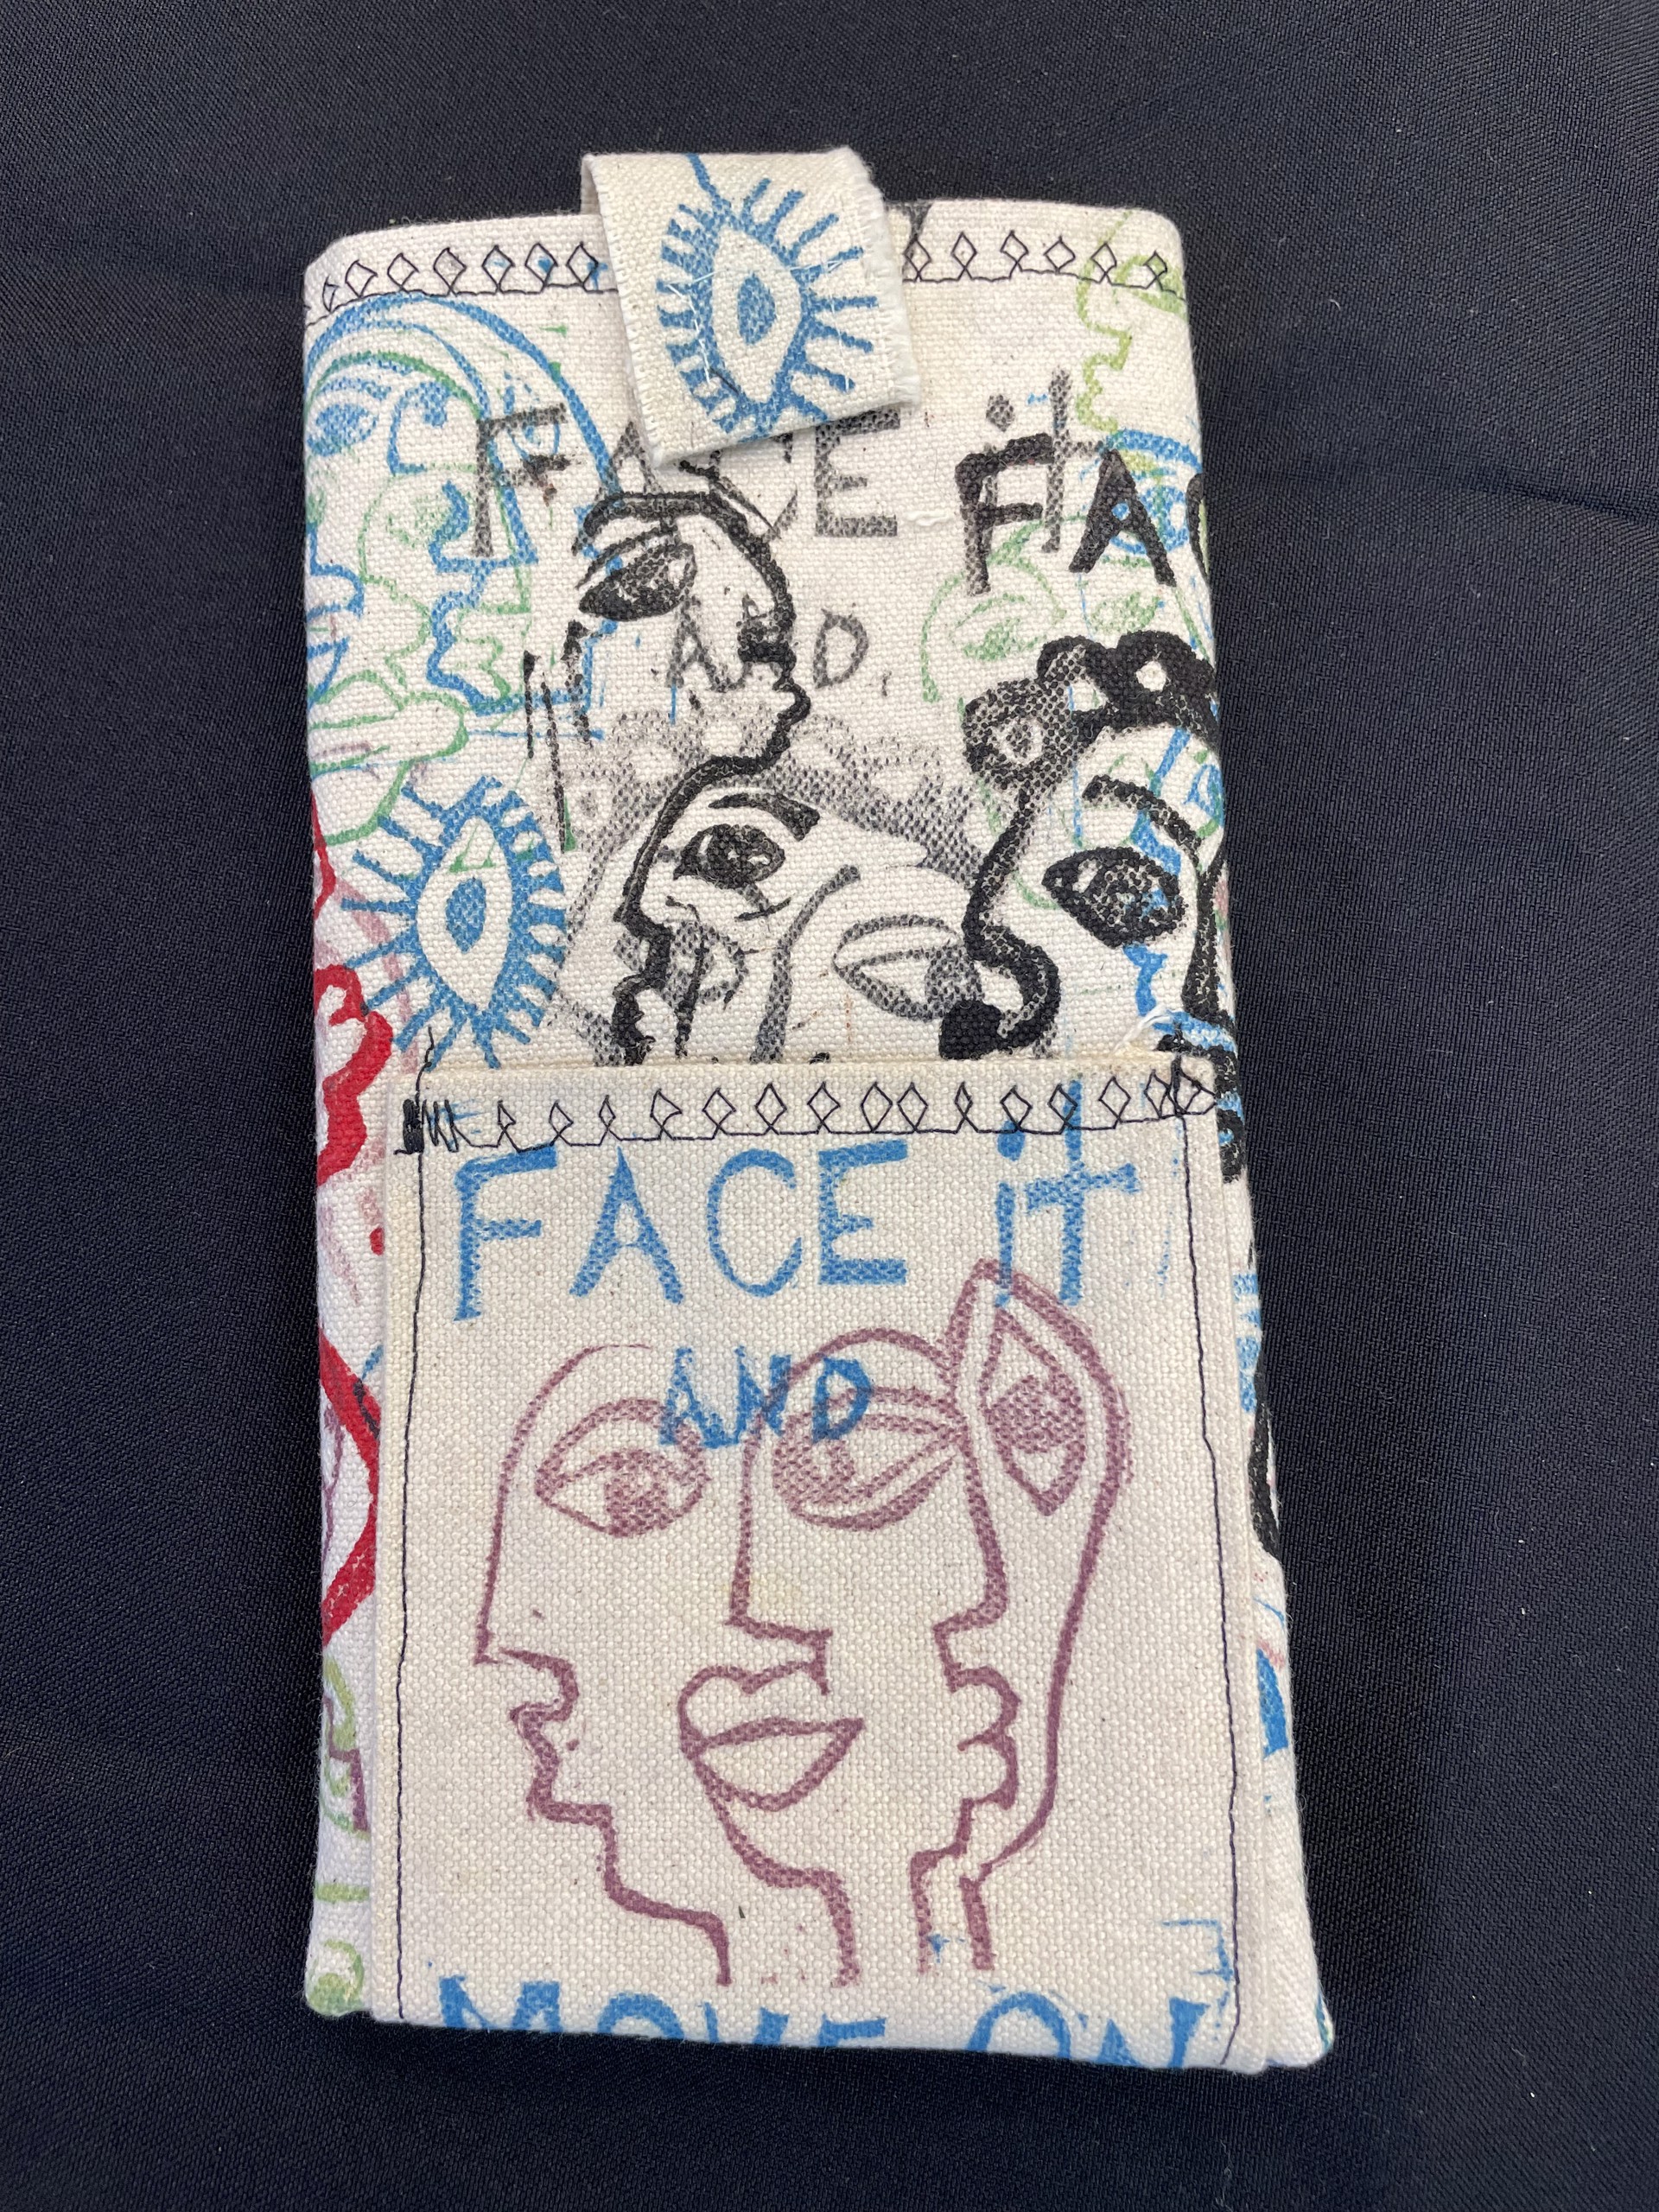 "Face It" Phone Bed (printed canvas mobile phone holder by Toni Lane) by Toni Lane